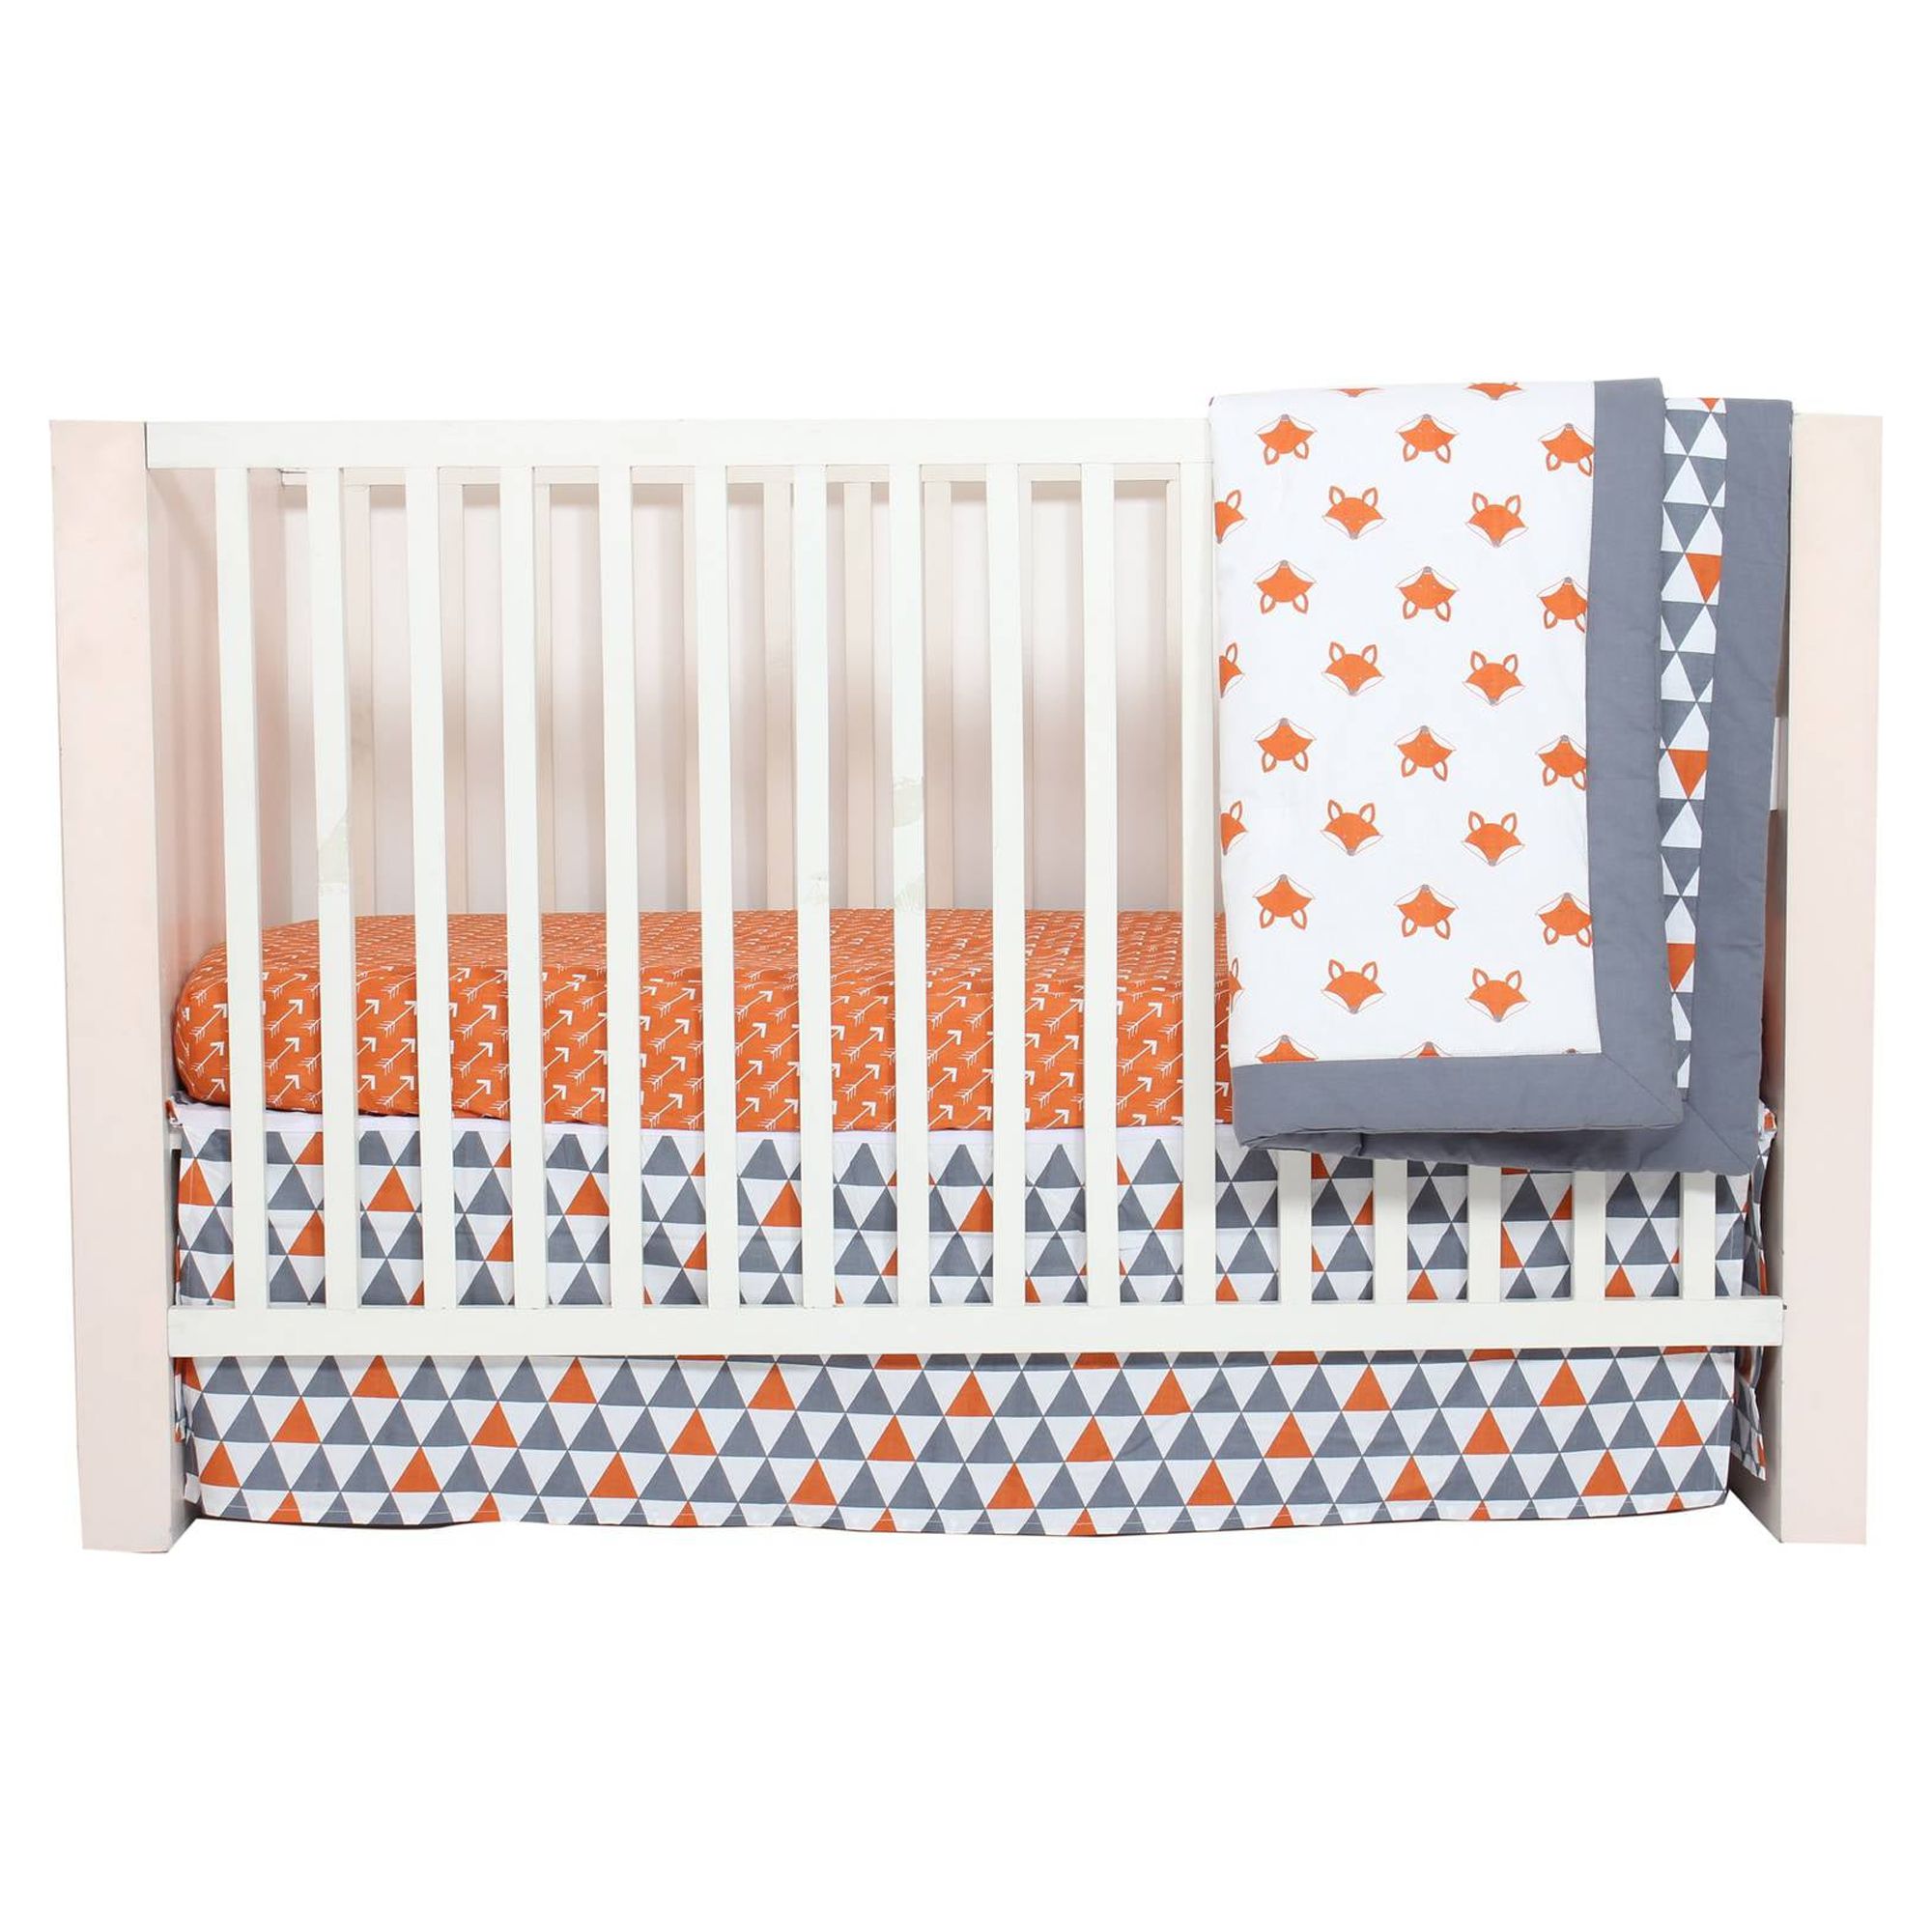 Bacati Contemporary 200 10 Piece, Crib with Comforter, Sheets, Crib Skirt, Mobile, Diaper Stacker, Wall Hangings, Window Valance - image 3 of 5